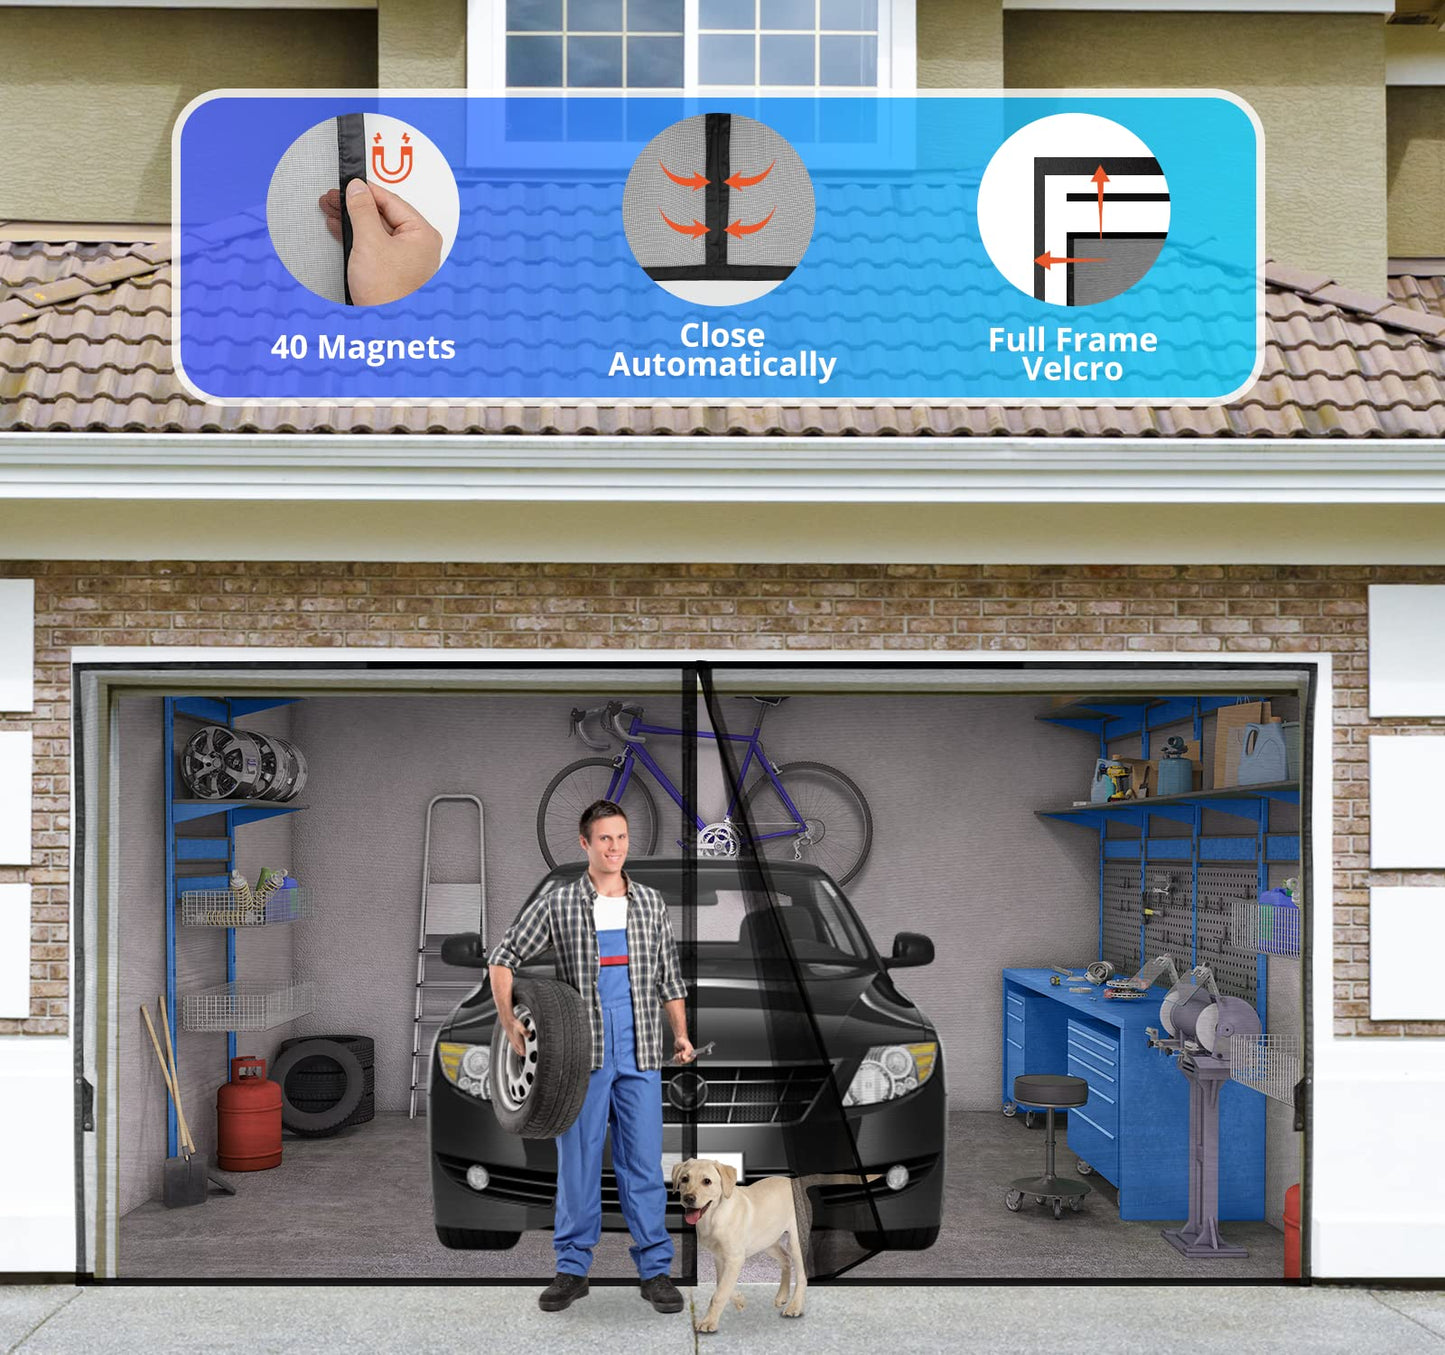 Garage Door Screen For 2 Car 16x7FT, Magnetic Screen Garage with Retractable Fiberglass Mesh and Heavy Duty Weighted Bottom, Easy Assembly & Pass, Hands Free Screen Door w/ 36 Magnets for Garage/Patio